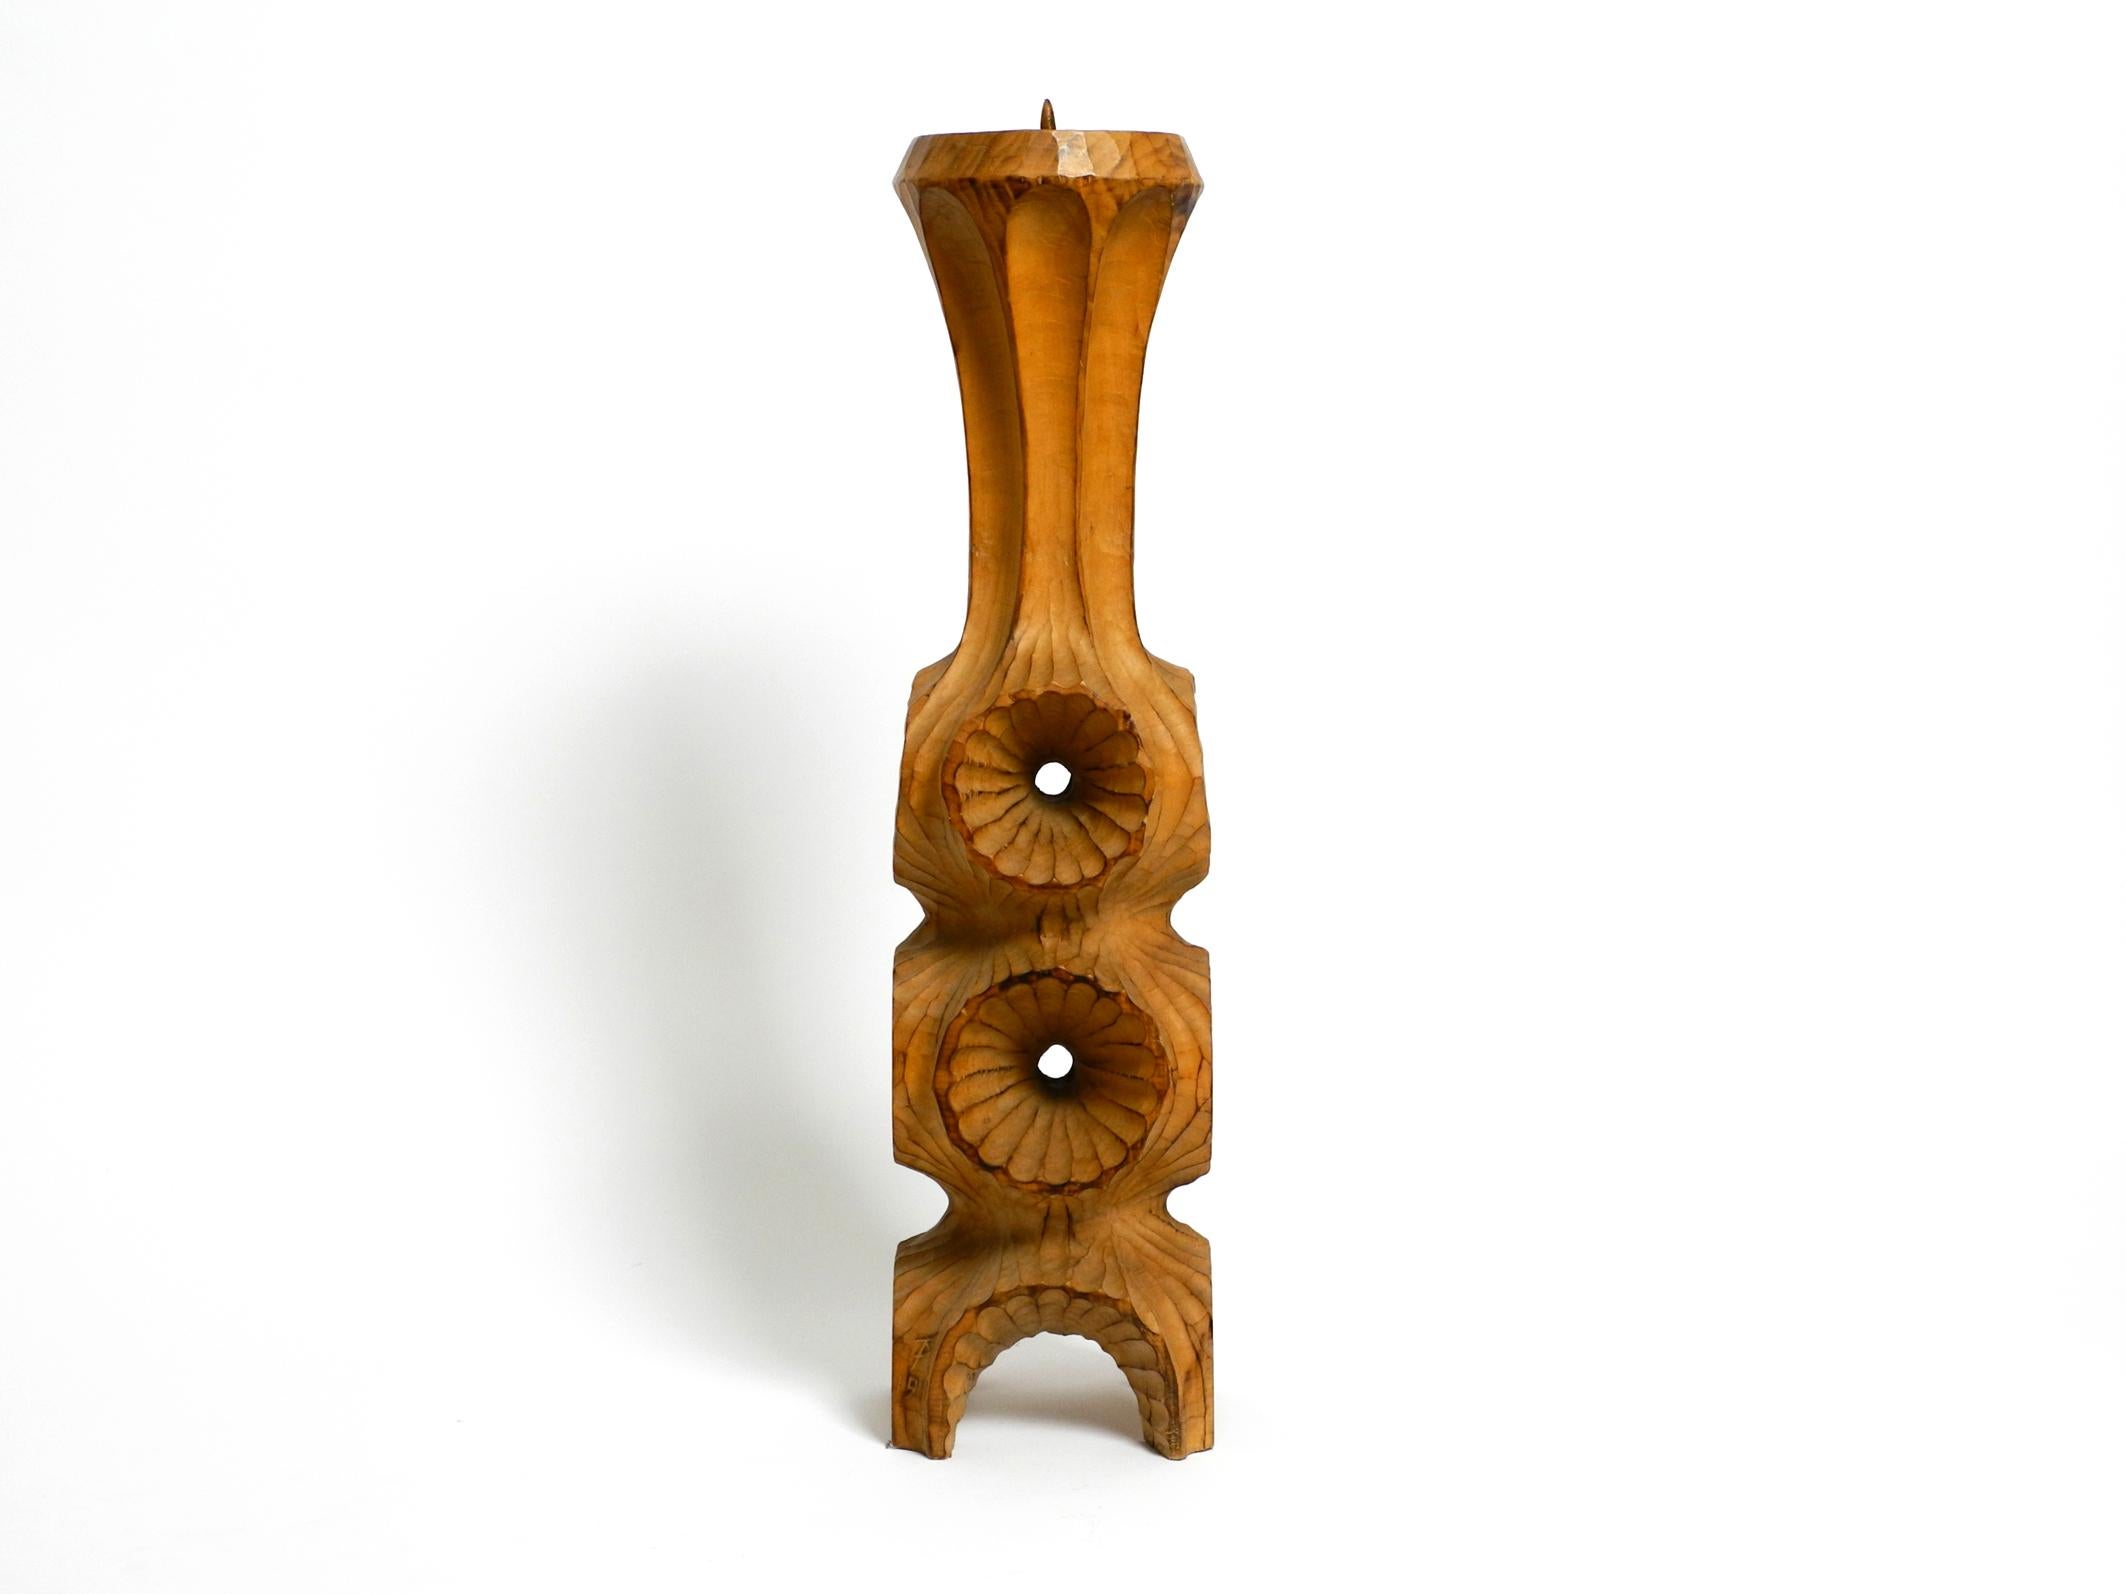 Large, rare, unique hand-carved basswood candlestick.
Made in Germany. On the bottom is a P and the date 1977.
In massive abstract brutalist design.
Very stable hold without damage. 100% original condition.
No wax residue to be seen on the entire